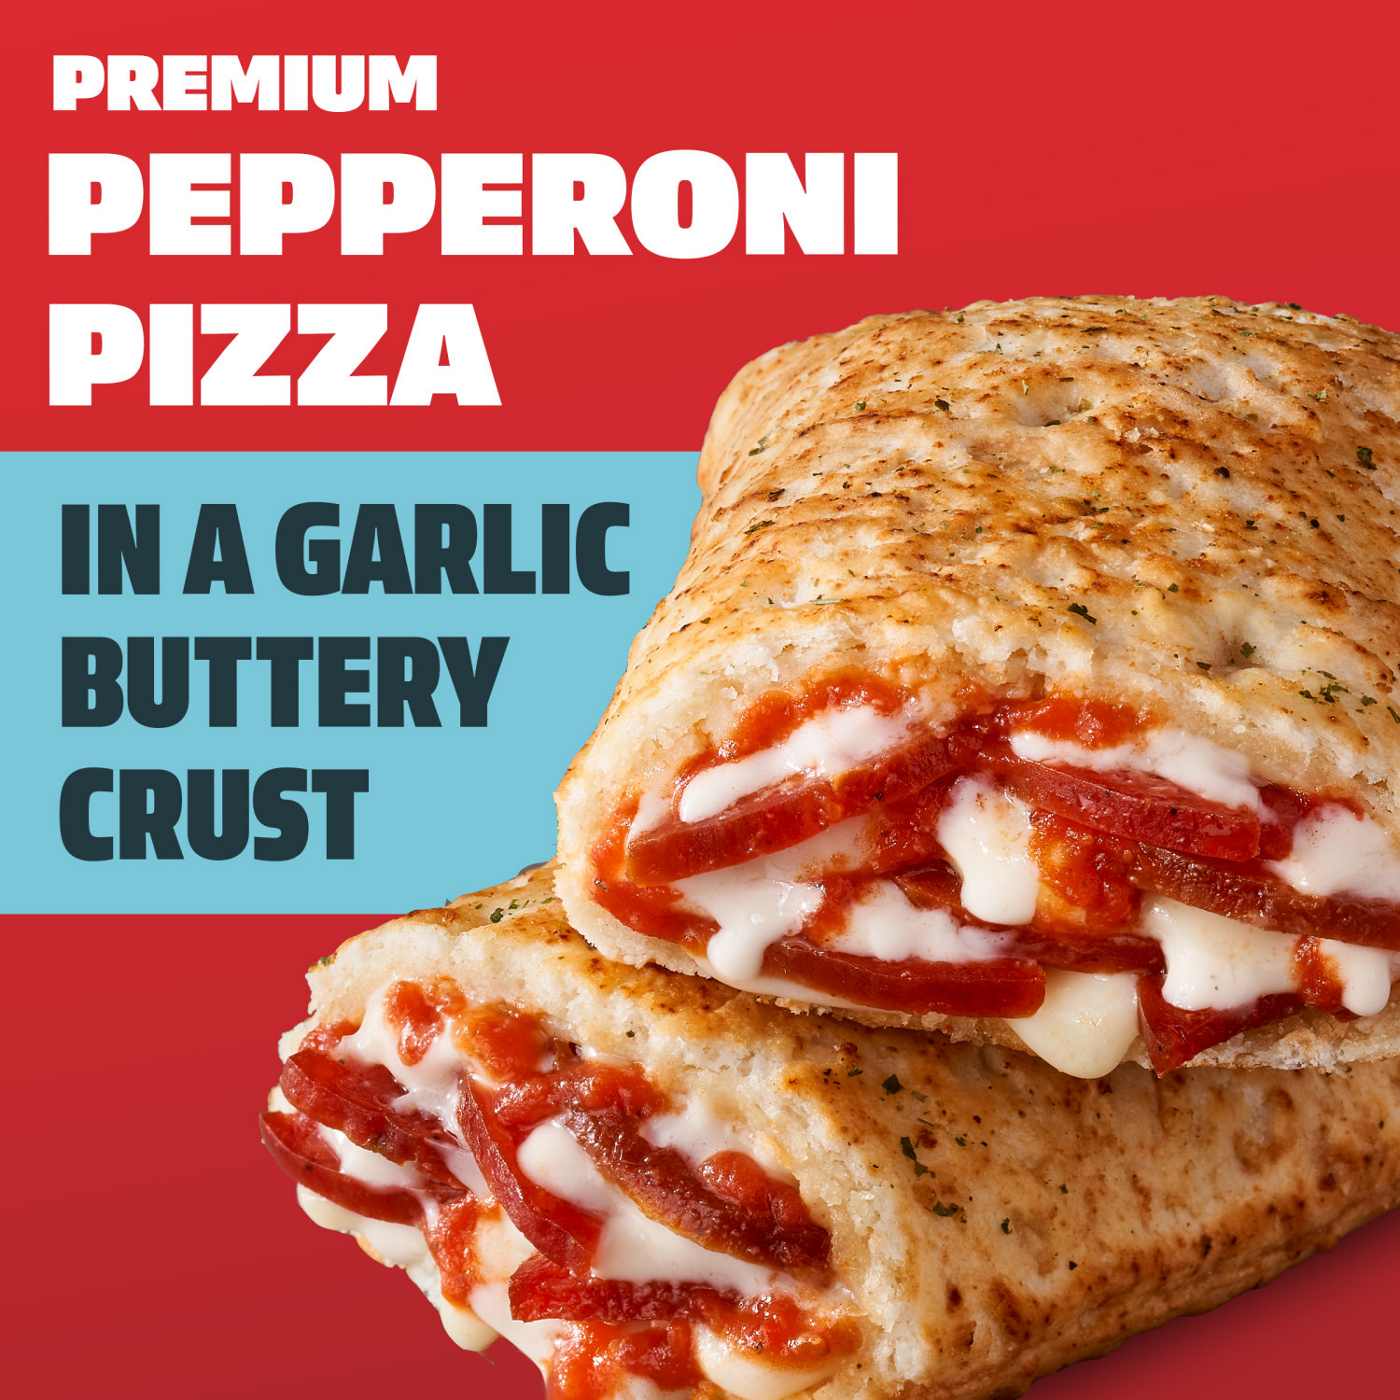 Hot Pockets Pepperoni Pizza Frozen Sandwiches - Garlic Buttery Crust; image 3 of 7